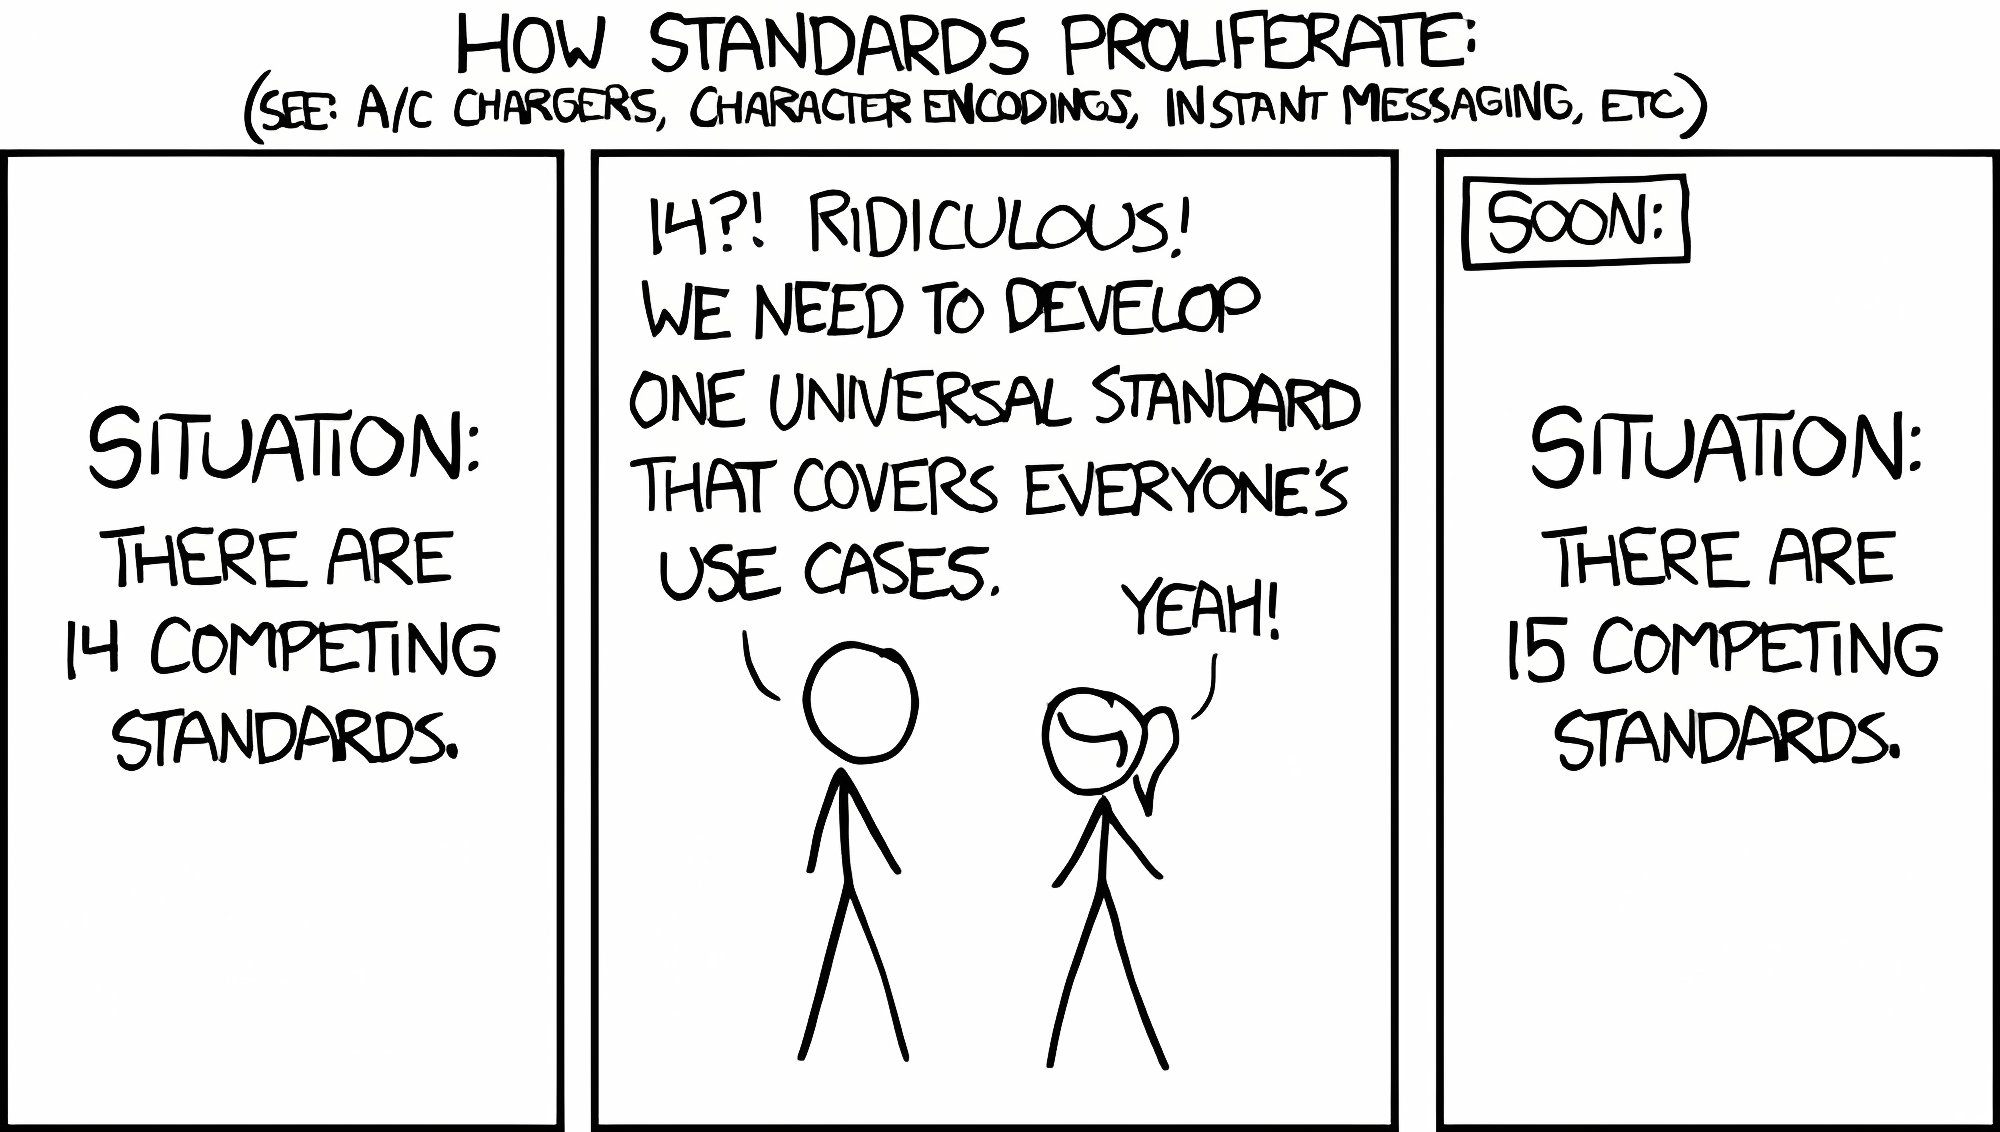 Standards, we need more standards! (Source: xkcd, License: CC BY-NC 2.5)